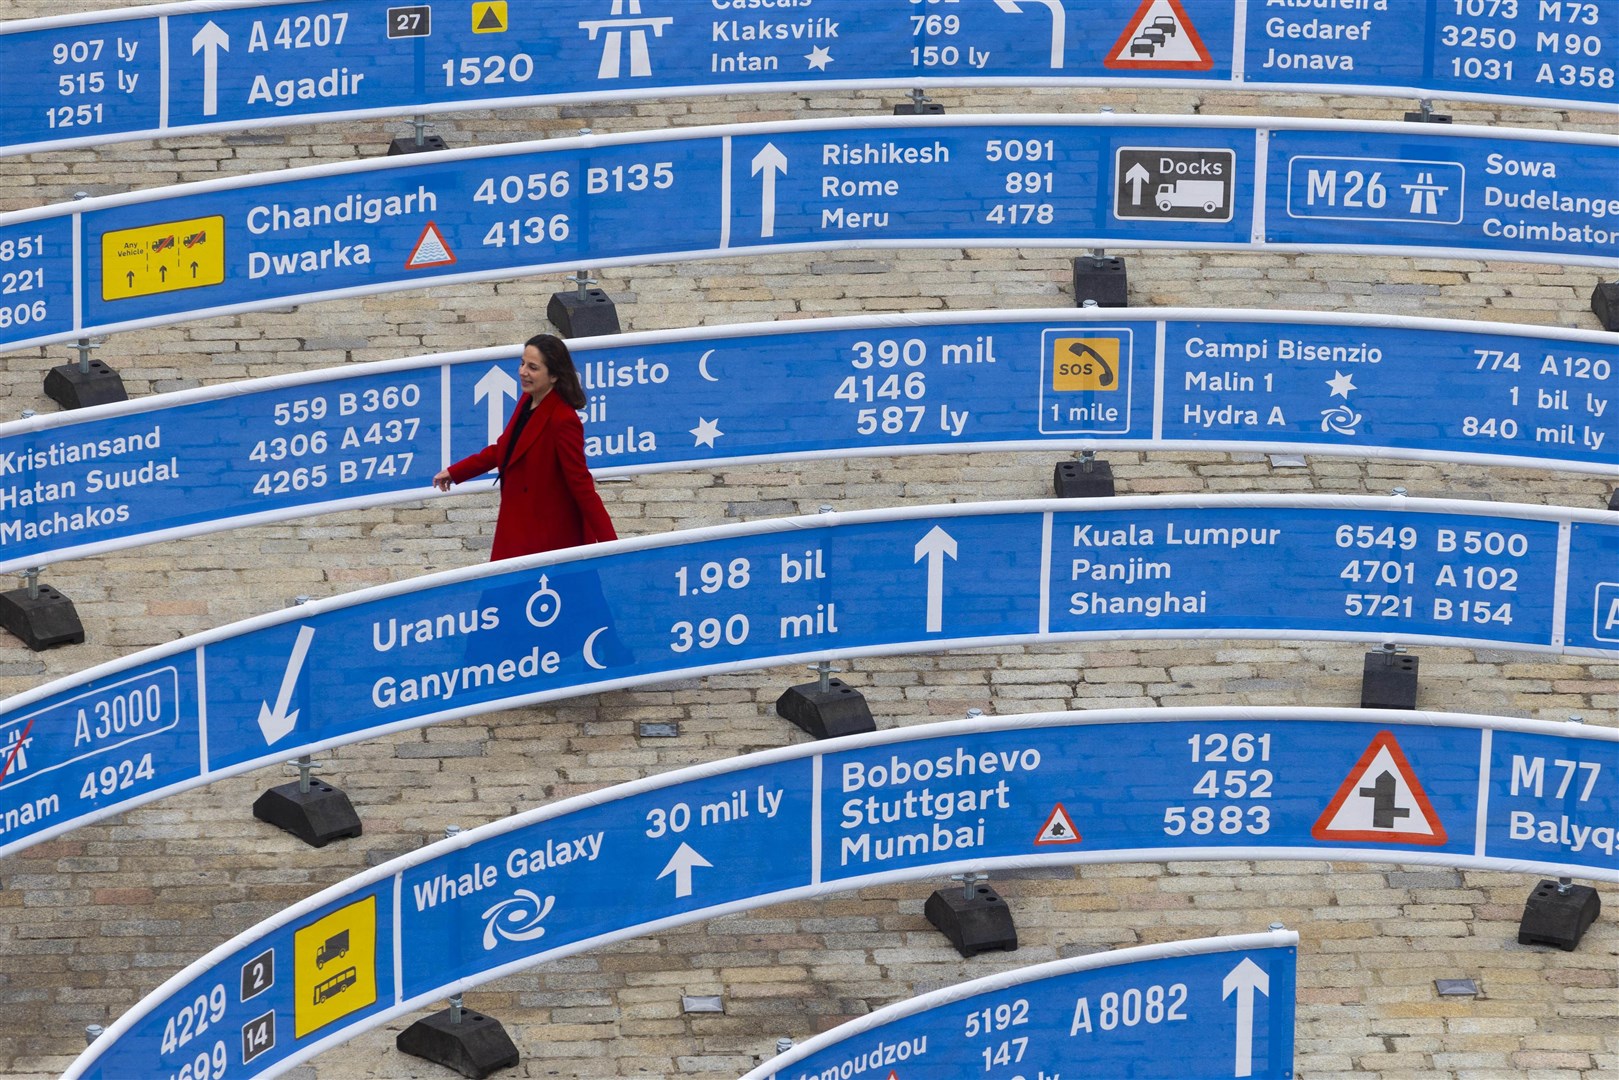 In a spiral shape, standing 336-metres (1,102-ft) long and 30-metres (98-ft) wide, the blue and white barriers have places, miles and traffic signs written on them. (David Parry/PA)